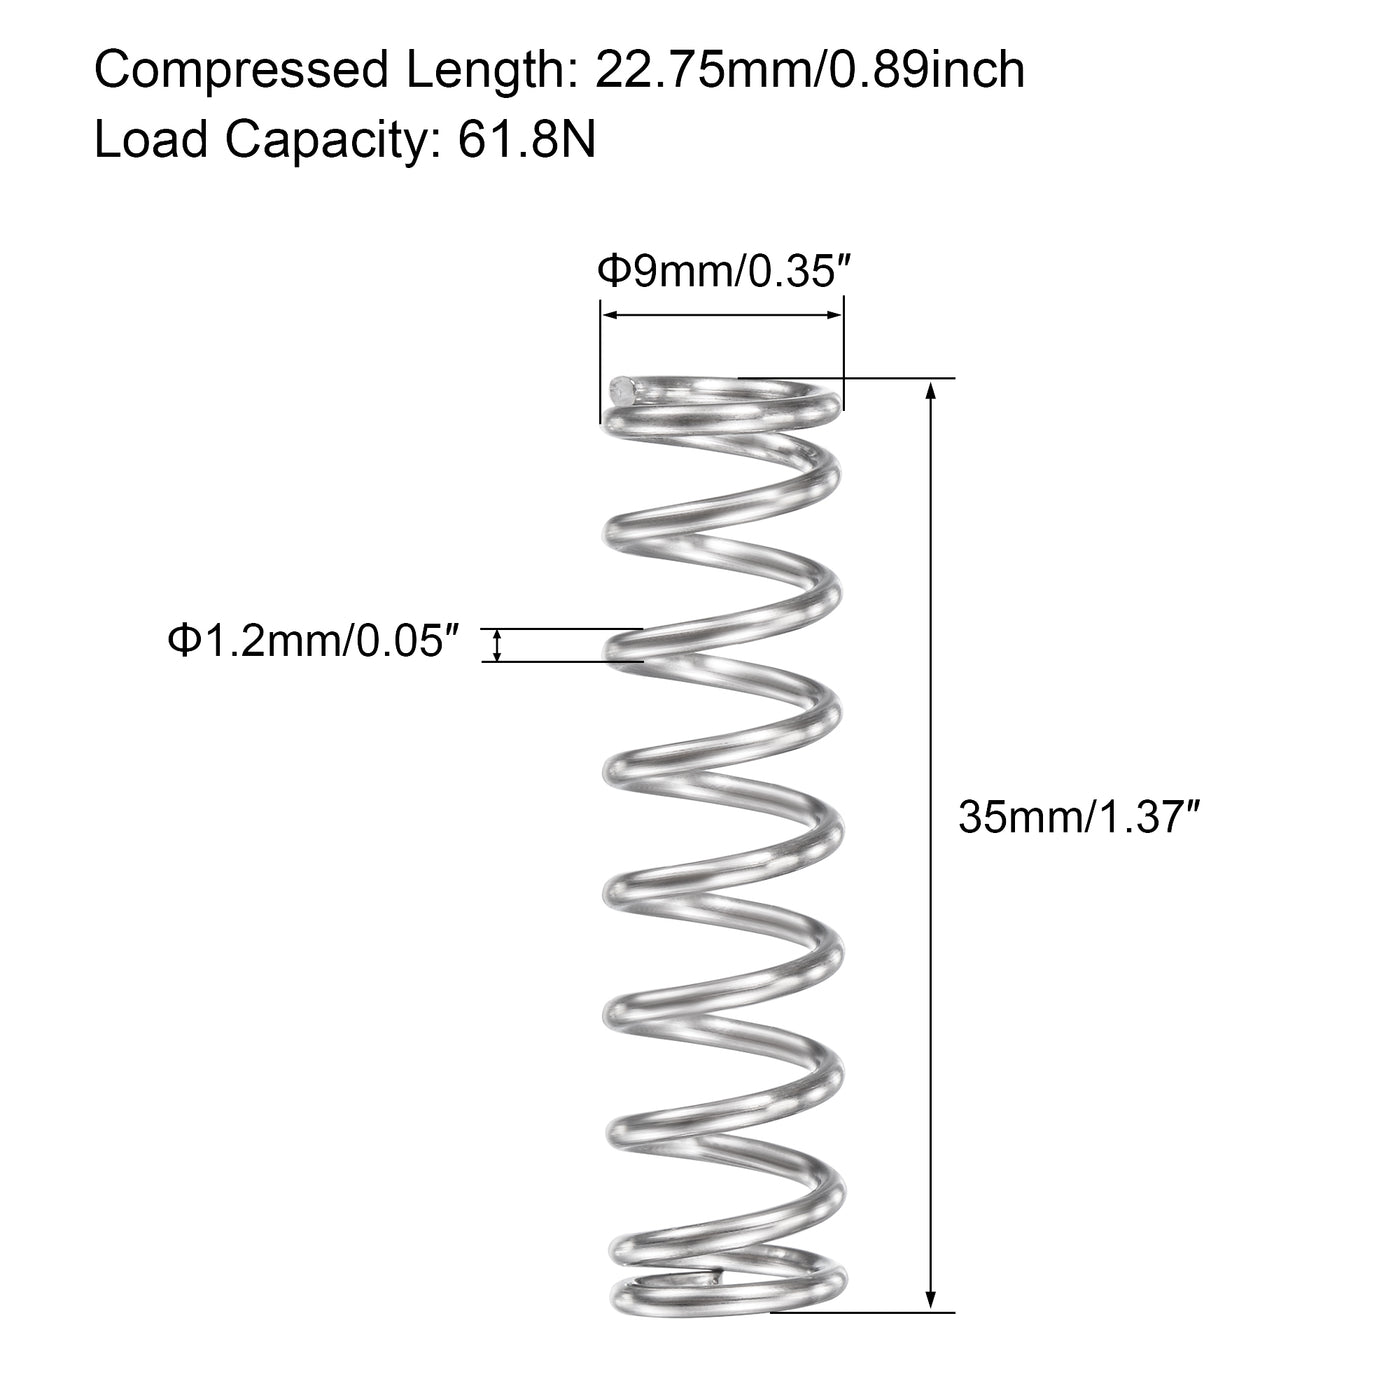 uxcell Uxcell 9mmx1.2mmx35mm 304 Stainless Steel Compression Spring 61.8N Load Capacity 5pcs